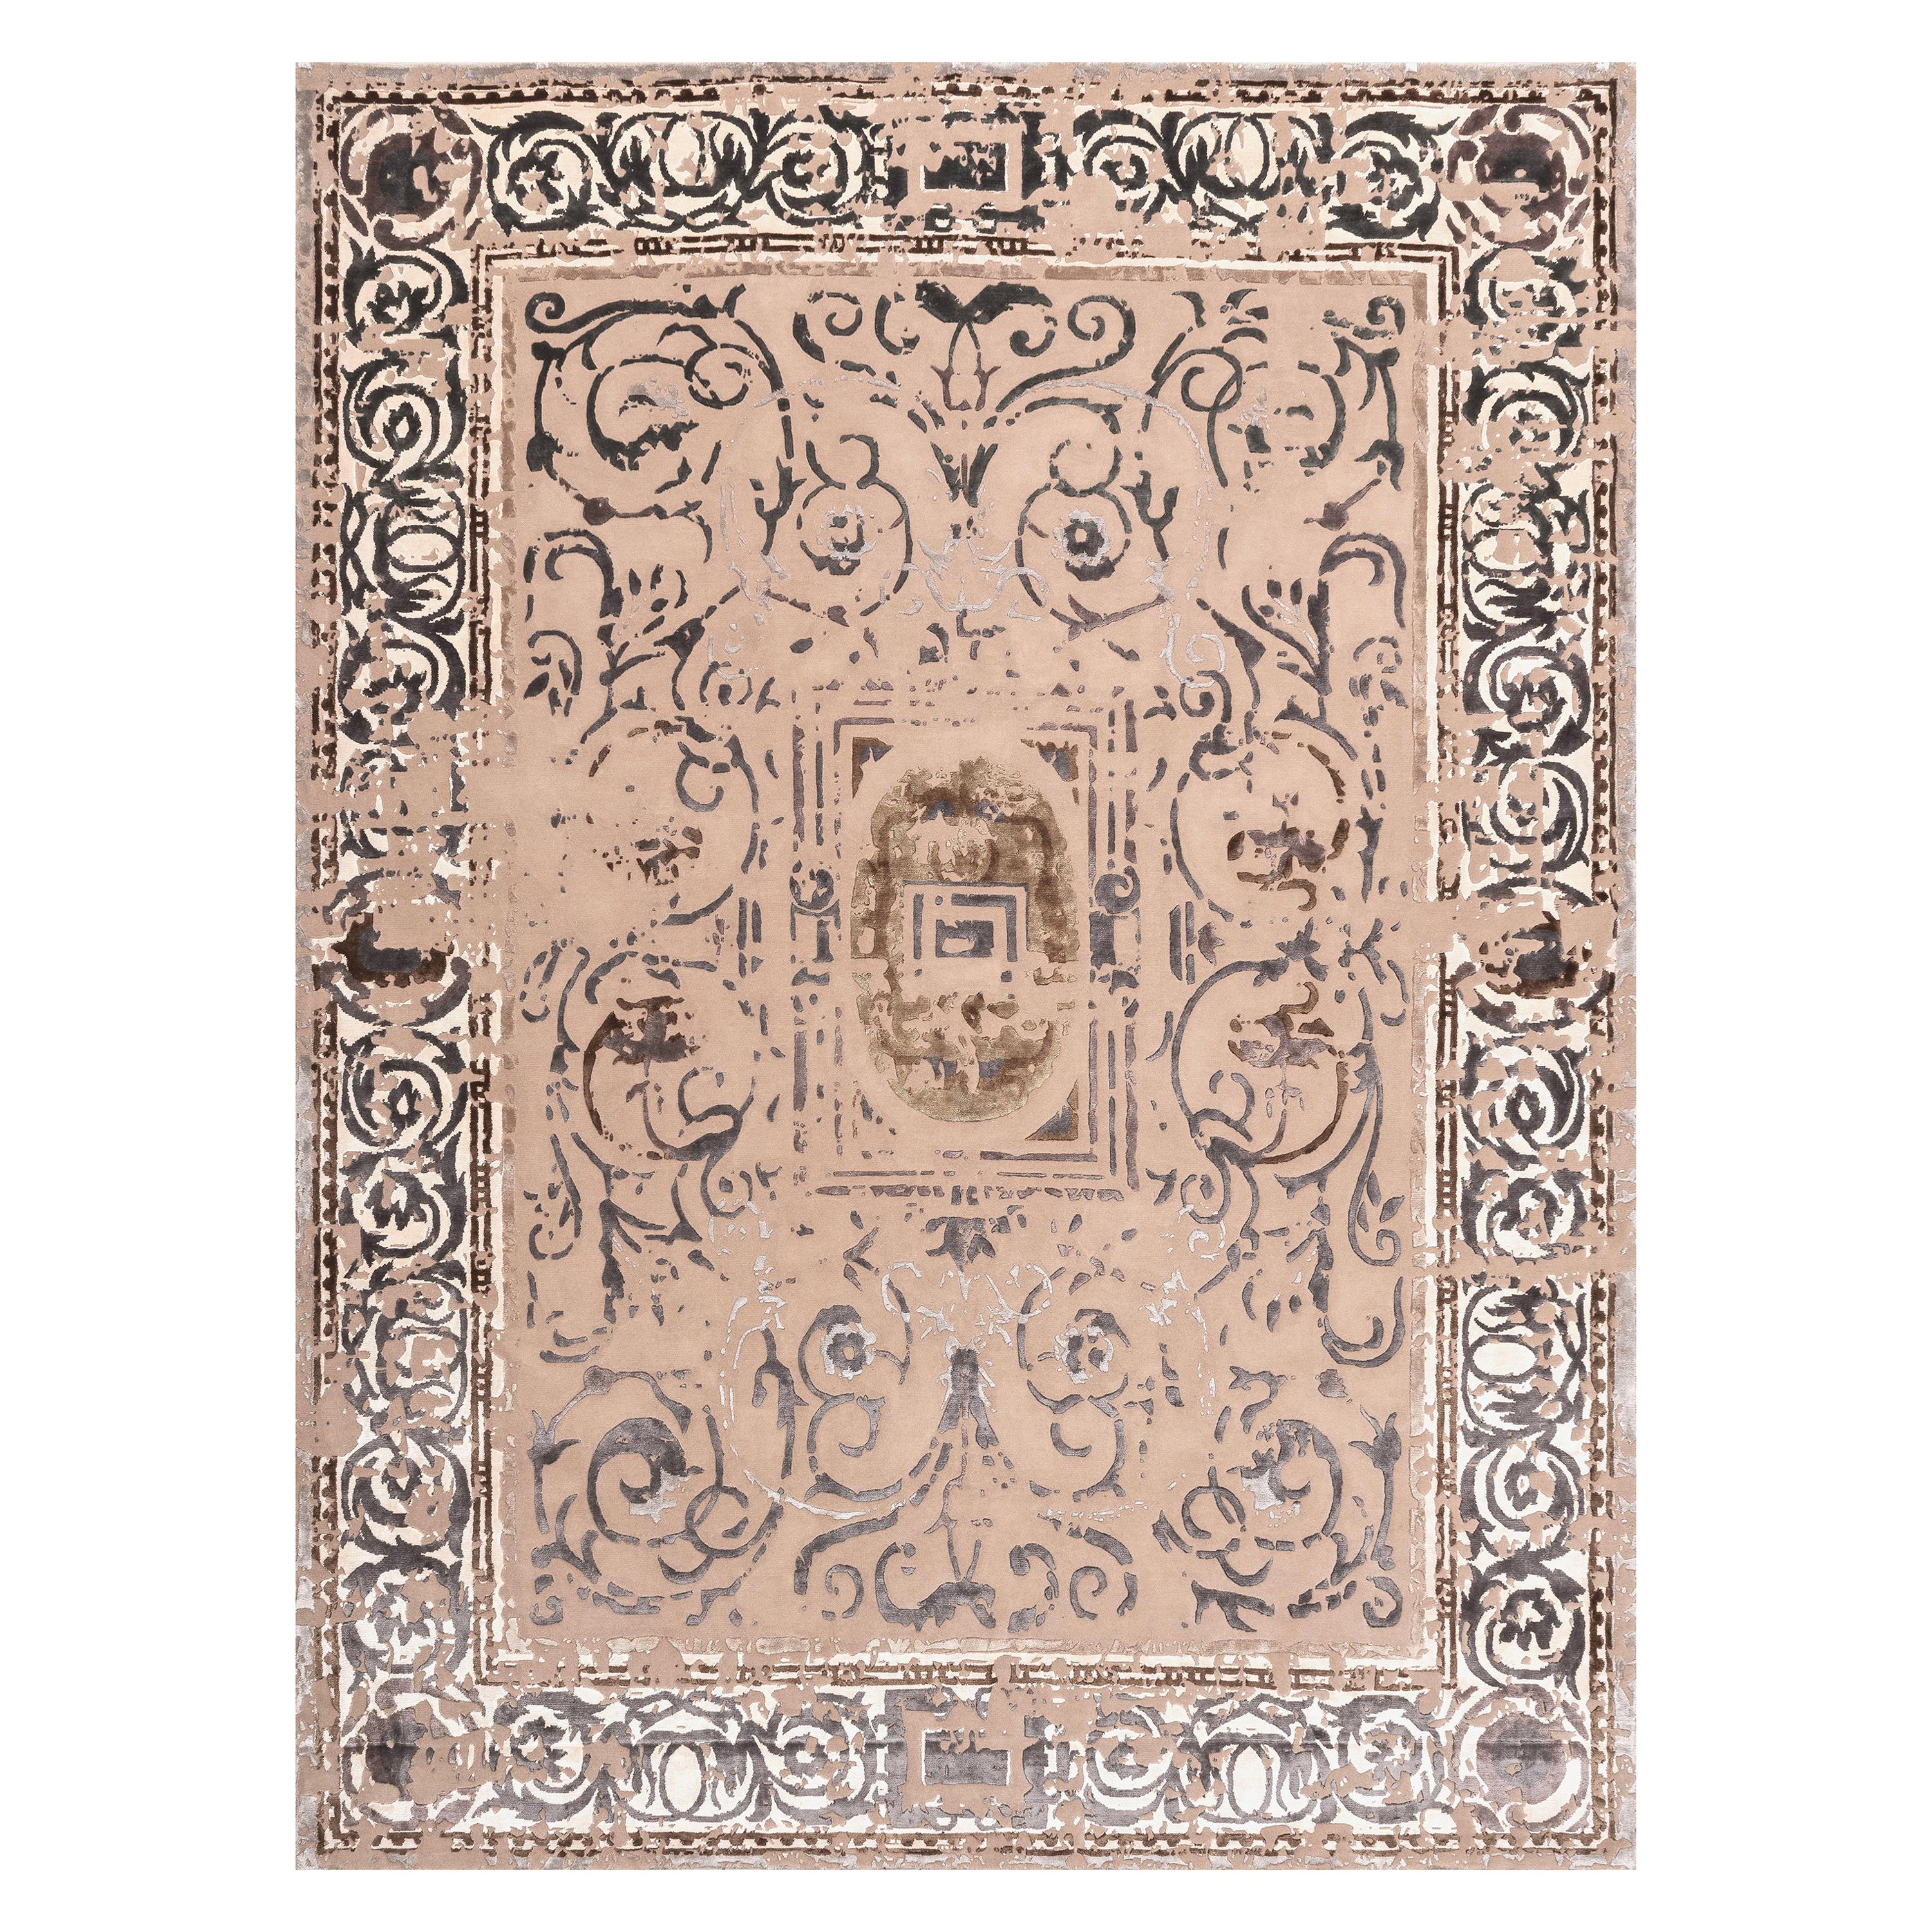 21st Century Carpet Rug Richelieu V1 in Himalayan Wool and Silk Gray, Beige